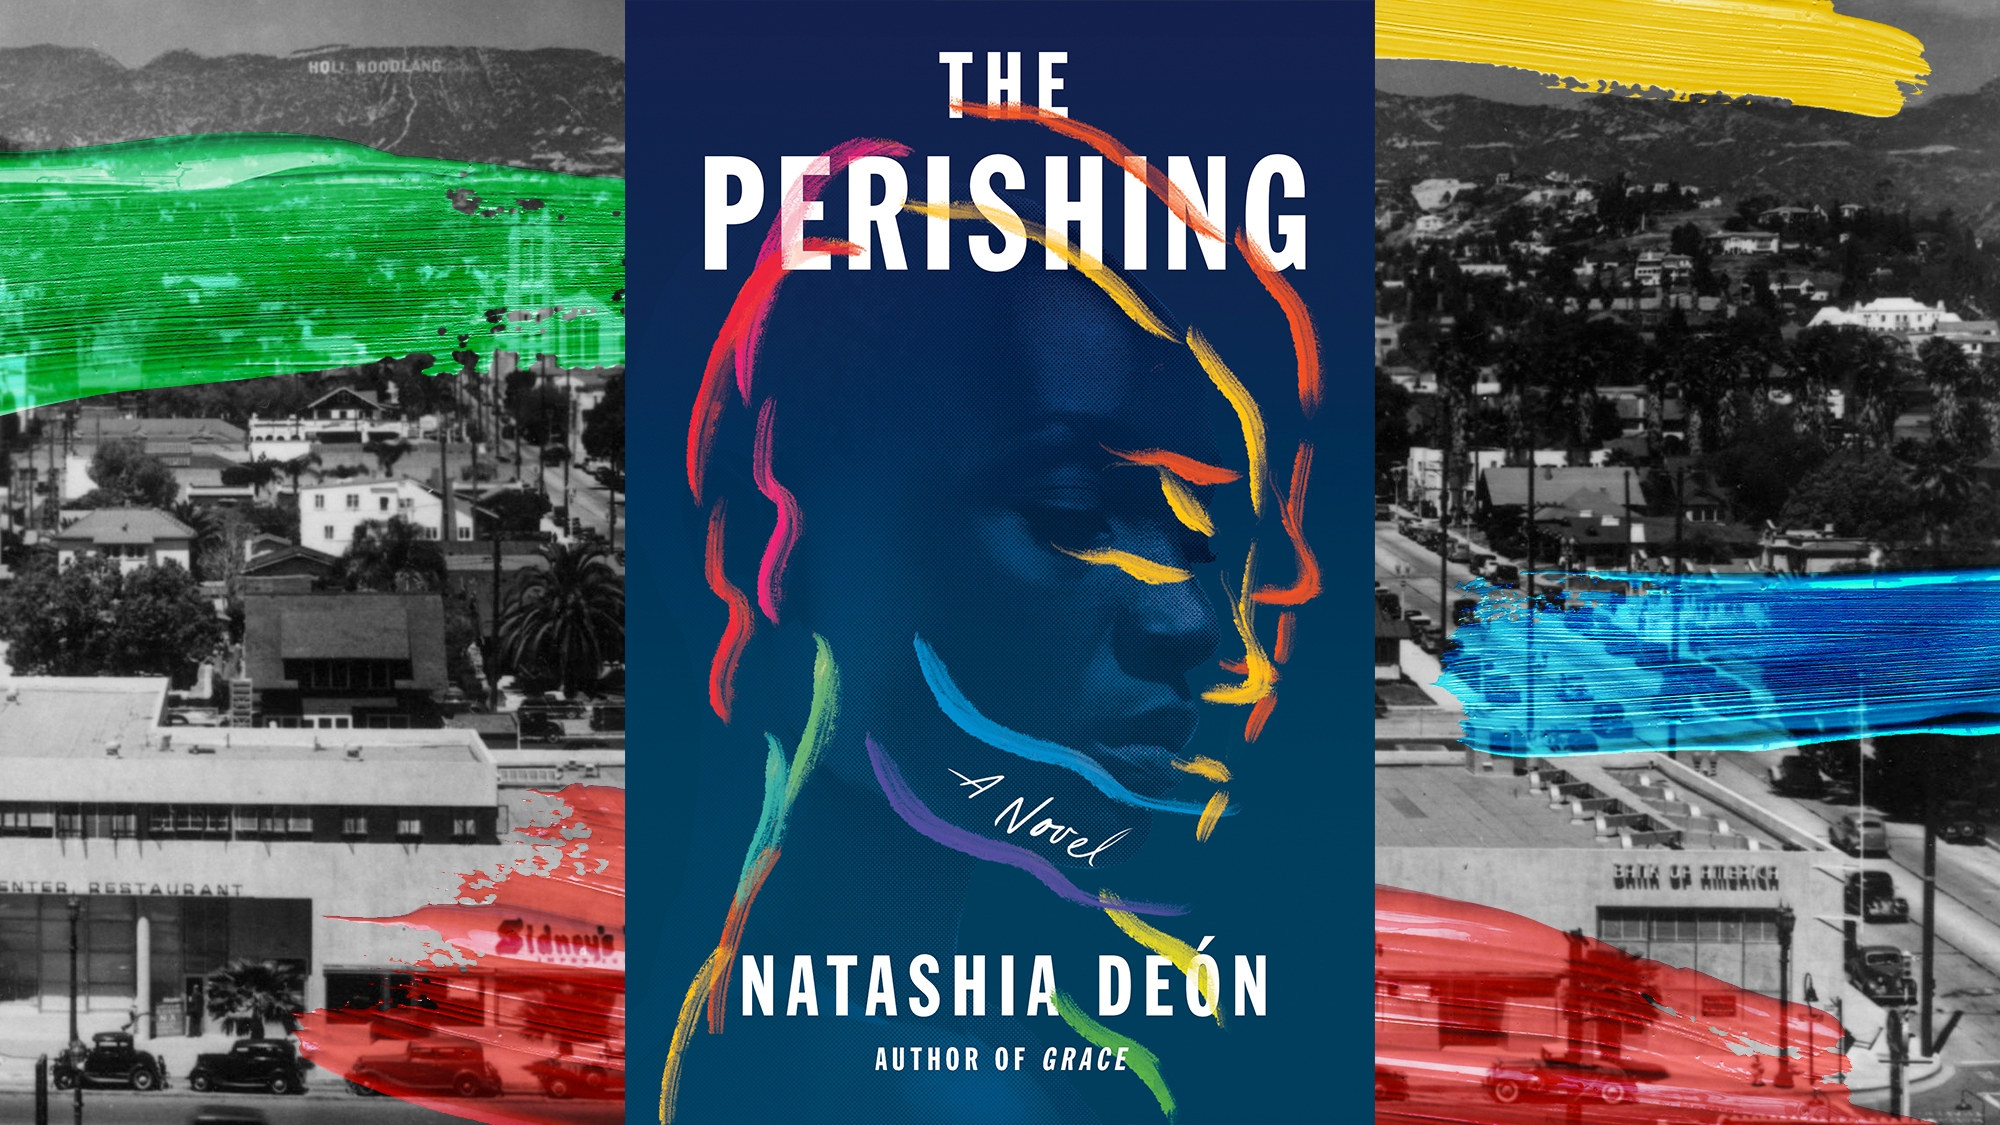 Supernatural thriller The Perishing is a luminous love letter to Los Angeles